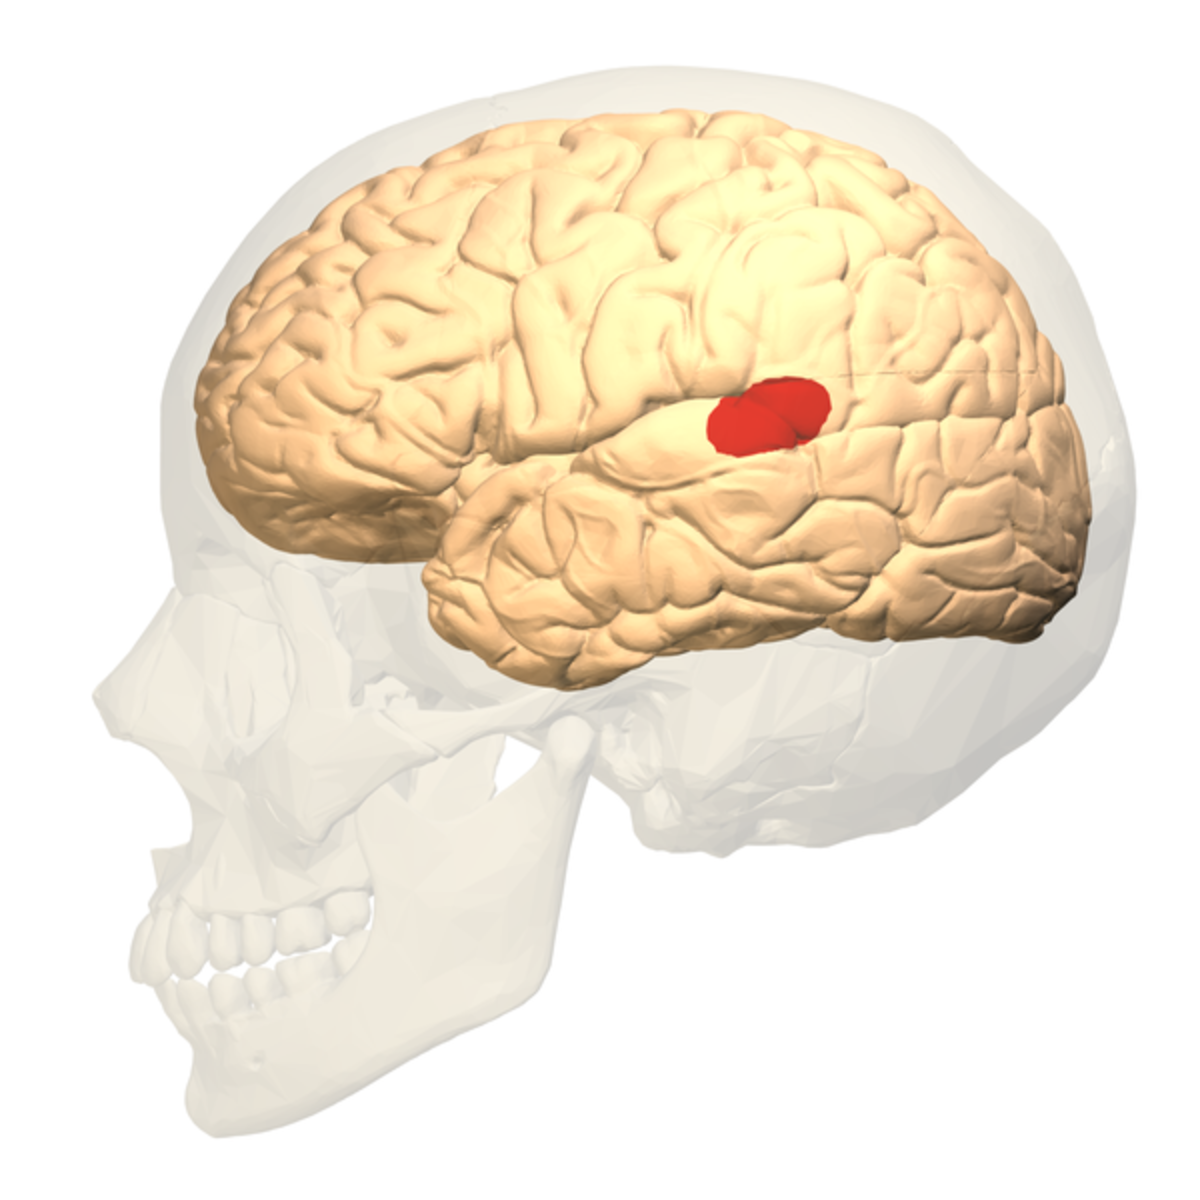 Wernicke's area is located where the parietal lobe joins the temporal lobe.